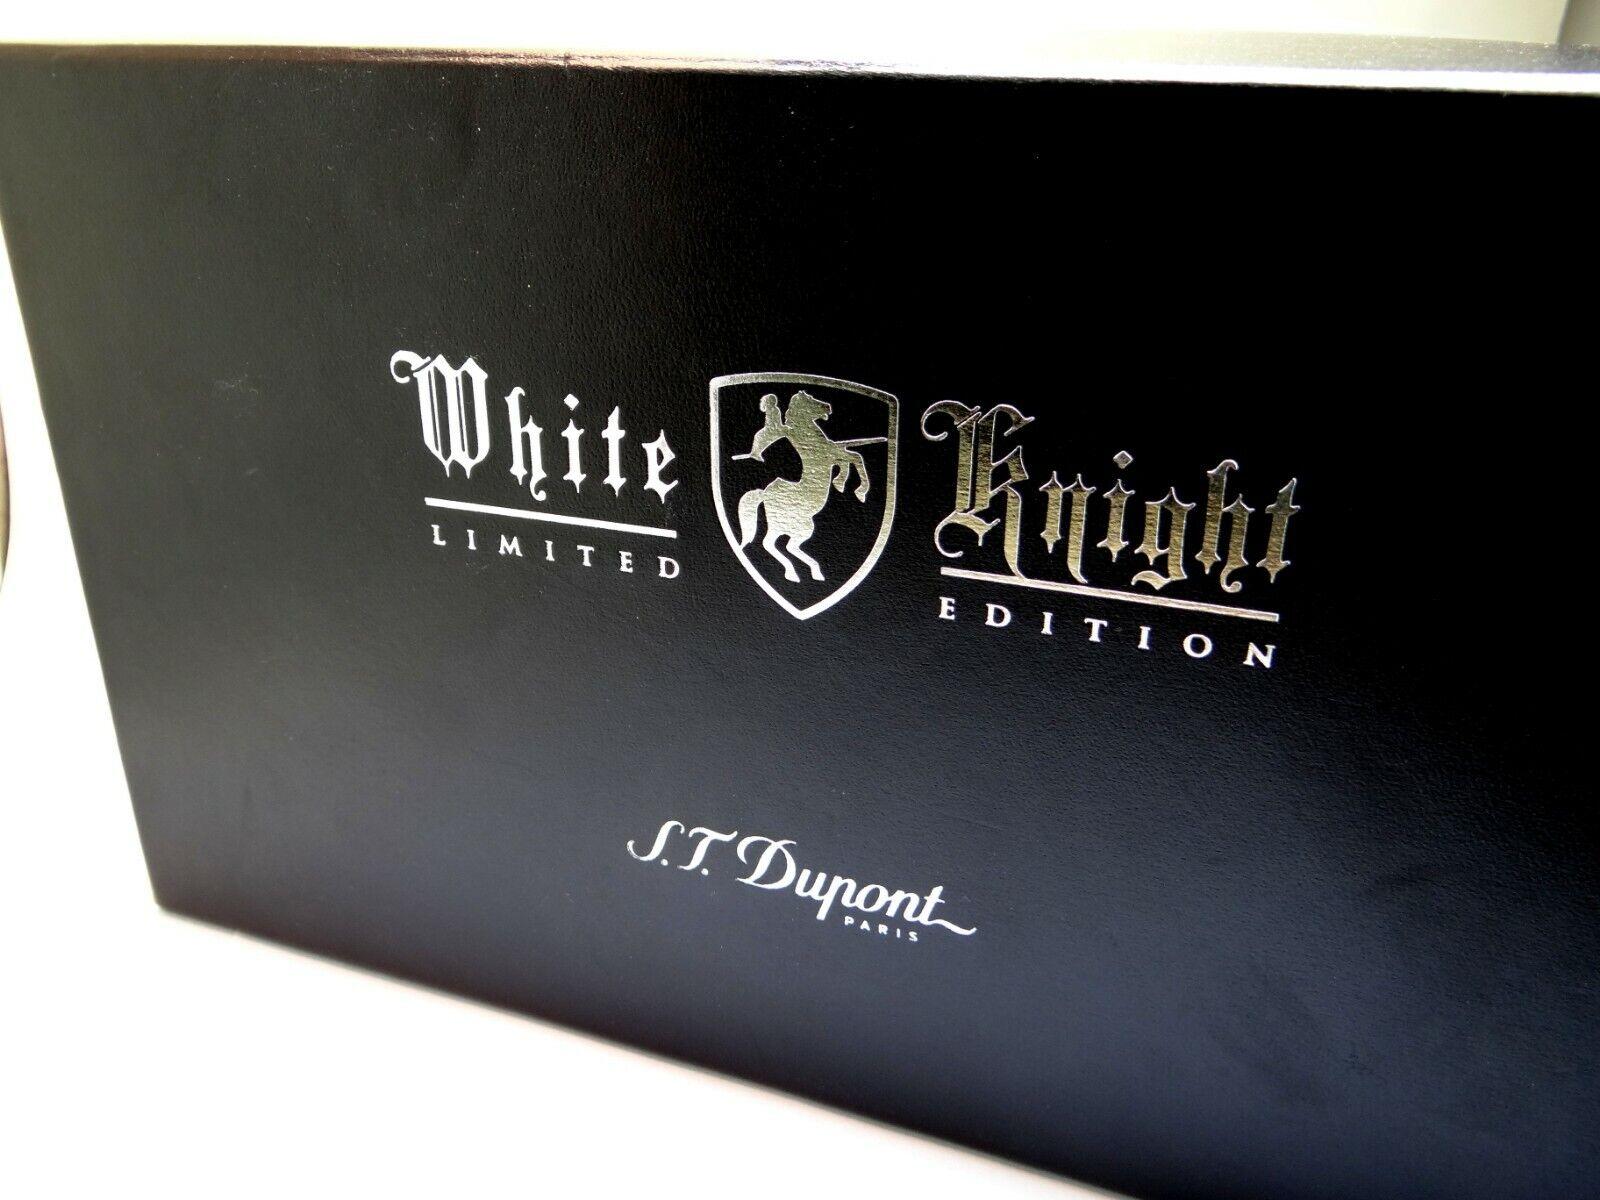 NWOT S.T. DUPONT White Knight Prestige Fountain Pen
Comes with original box and papers

ST Dupont White Knight Limited Edition is a prestige collection is made of pale gold with palladium finish using hand-gilded French Renaissance decoration. The